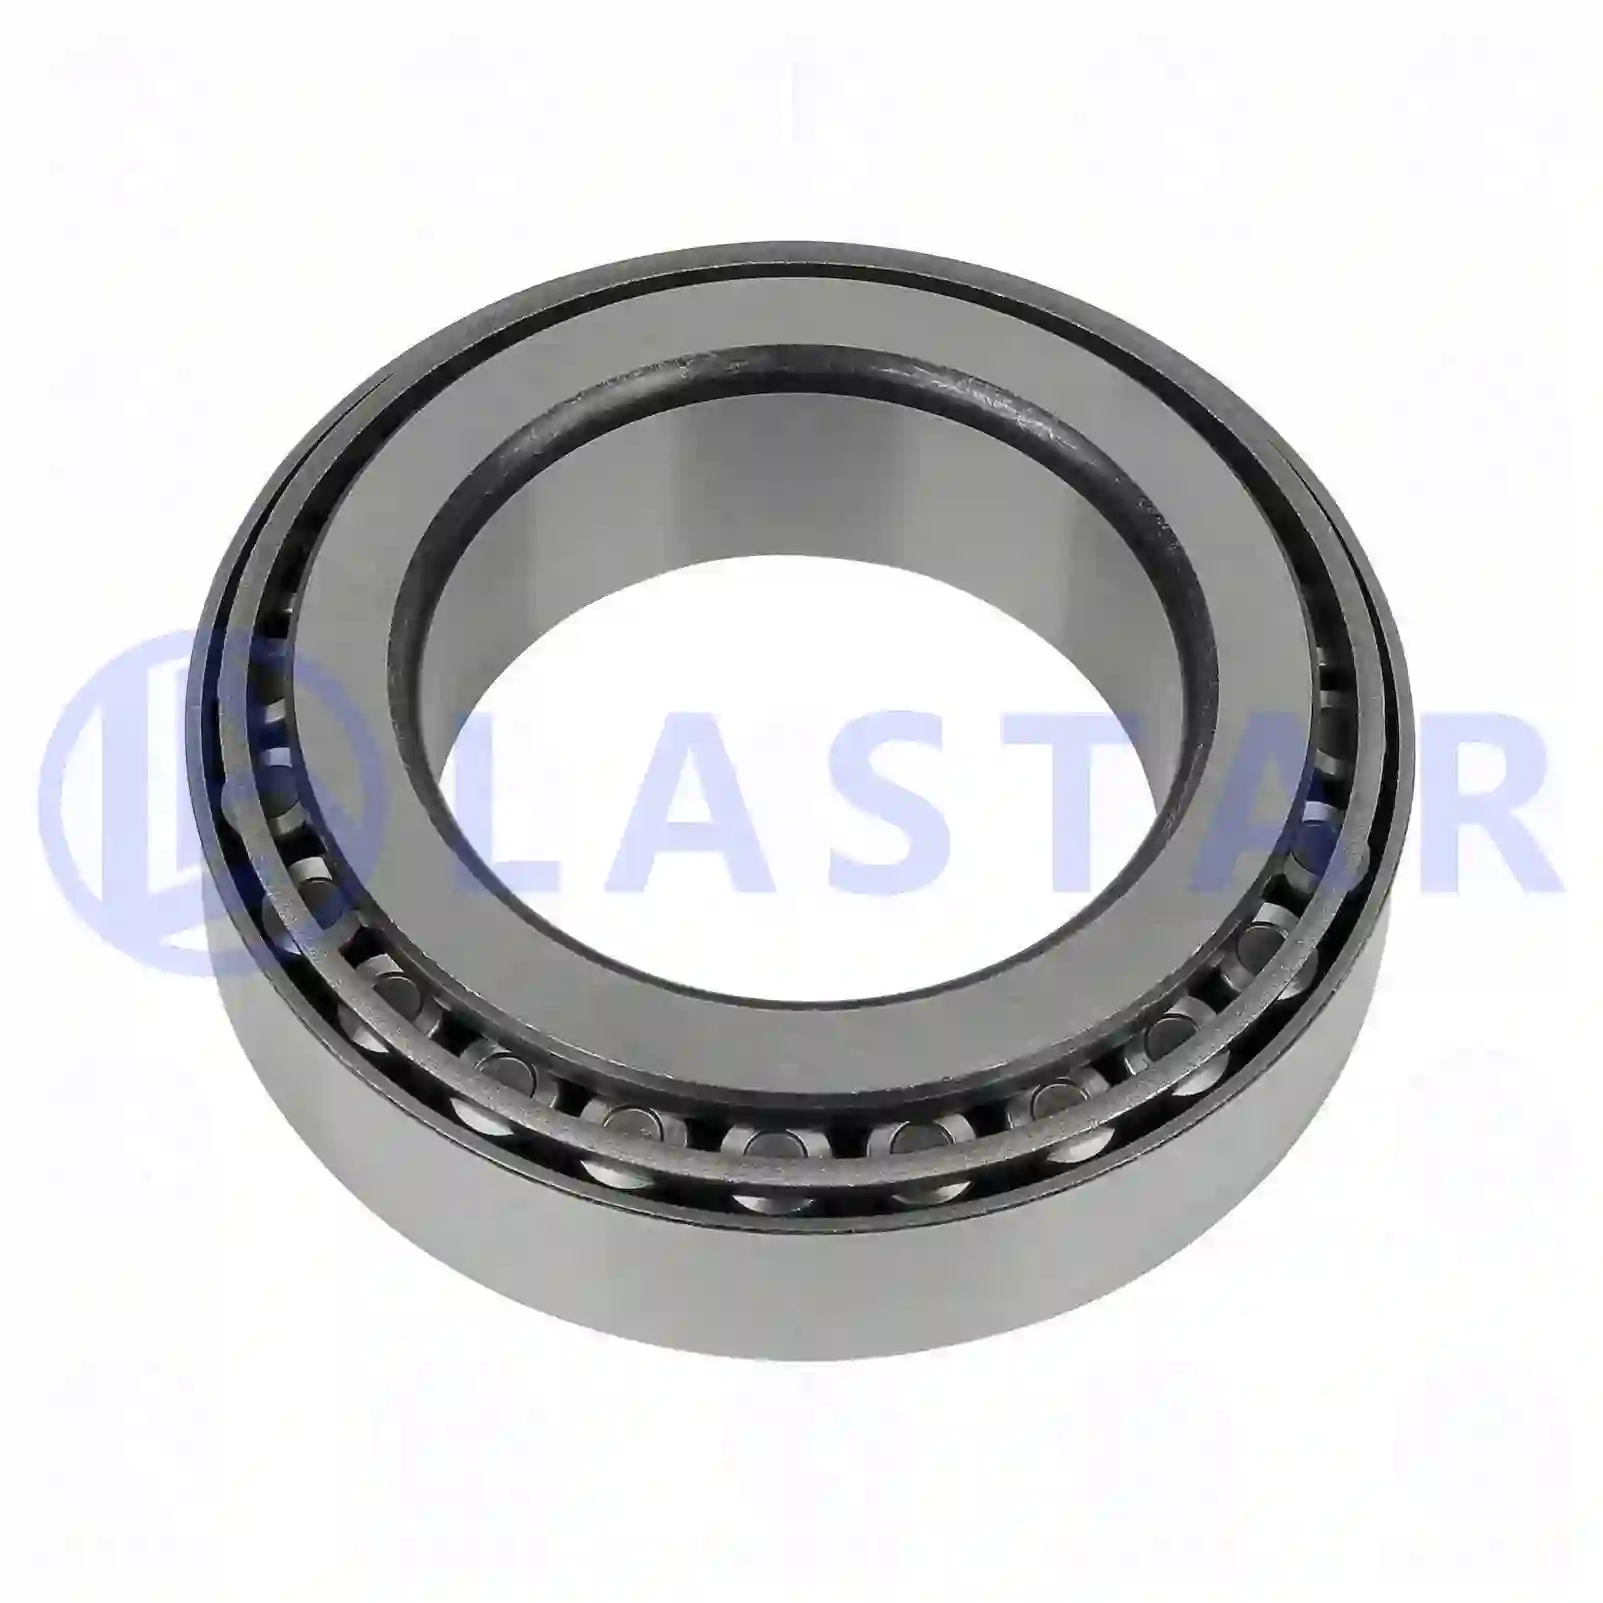 Tapered roller bearing, 77726525, 9433269, 988480104, 988480104A, 07160953, 7160953, 4200005100, 6015000D, T6015000D000, 184112 ||  77726525 Lastar Spare Part | Truck Spare Parts, Auotomotive Spare Parts Tapered roller bearing, 77726525, 9433269, 988480104, 988480104A, 07160953, 7160953, 4200005100, 6015000D, T6015000D000, 184112 ||  77726525 Lastar Spare Part | Truck Spare Parts, Auotomotive Spare Parts